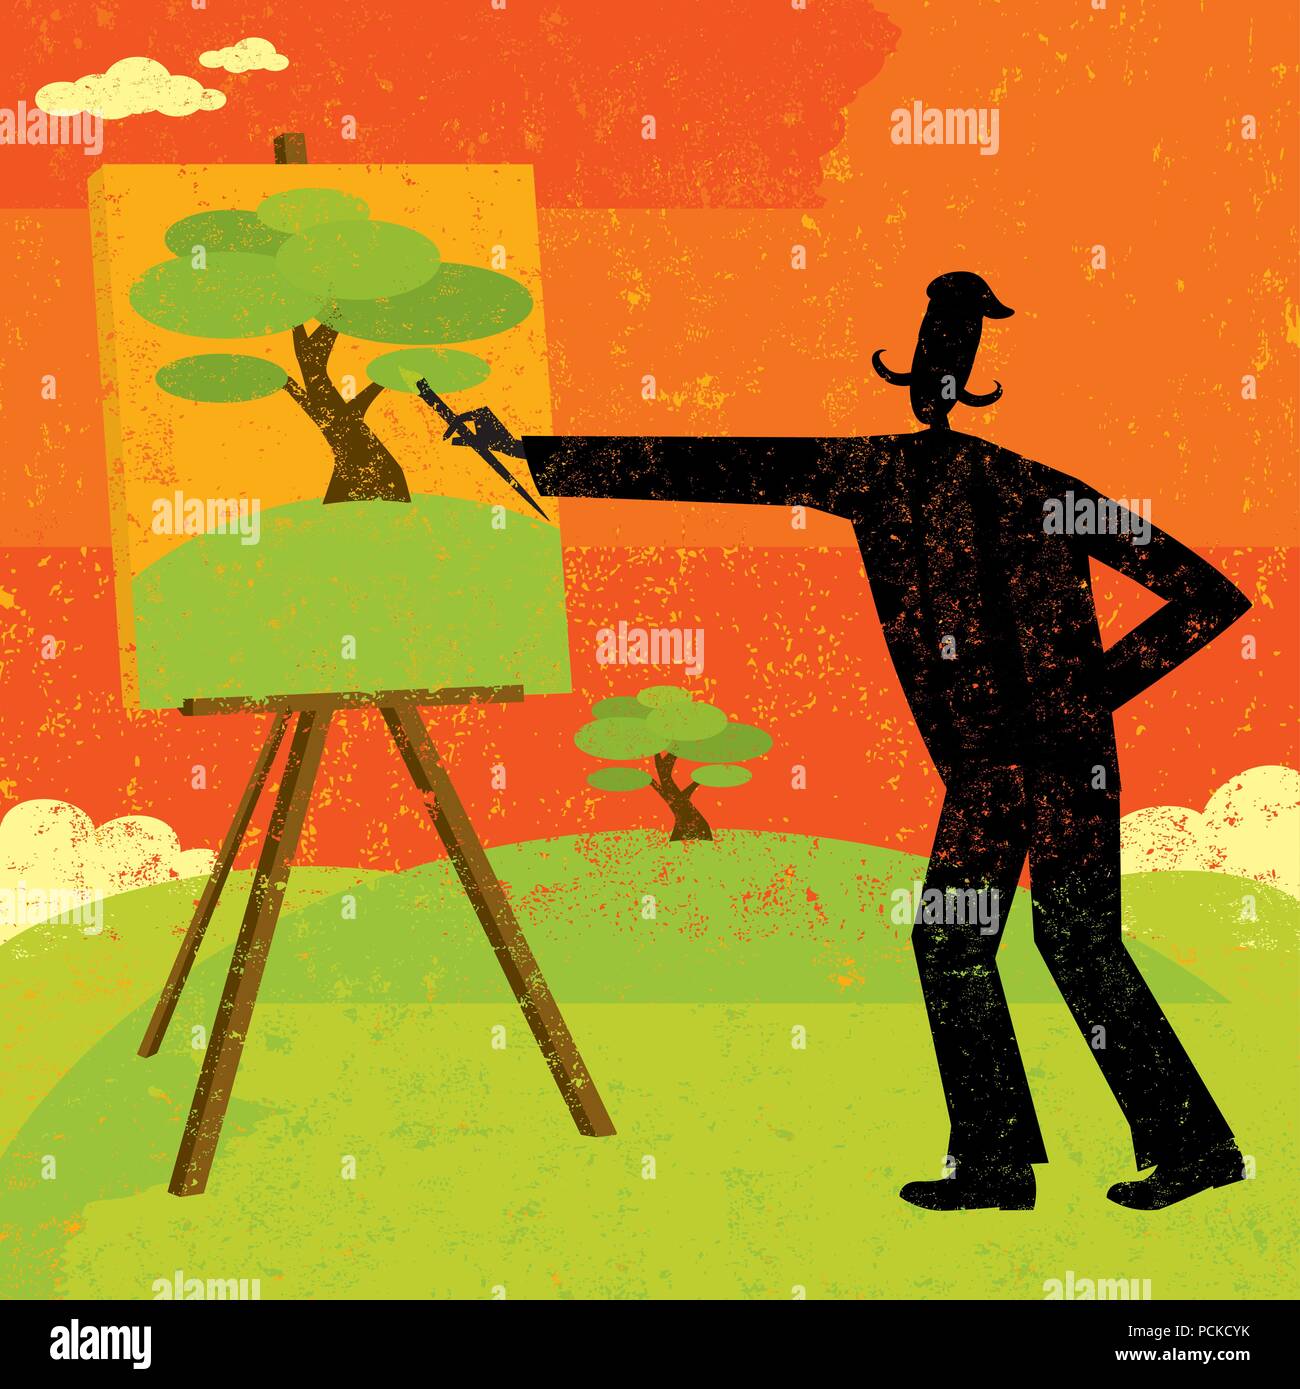 Artist Painting An artist painting a landscape with a large tree. The artist & painting and the background are on separately labeled layers. Stock Vector